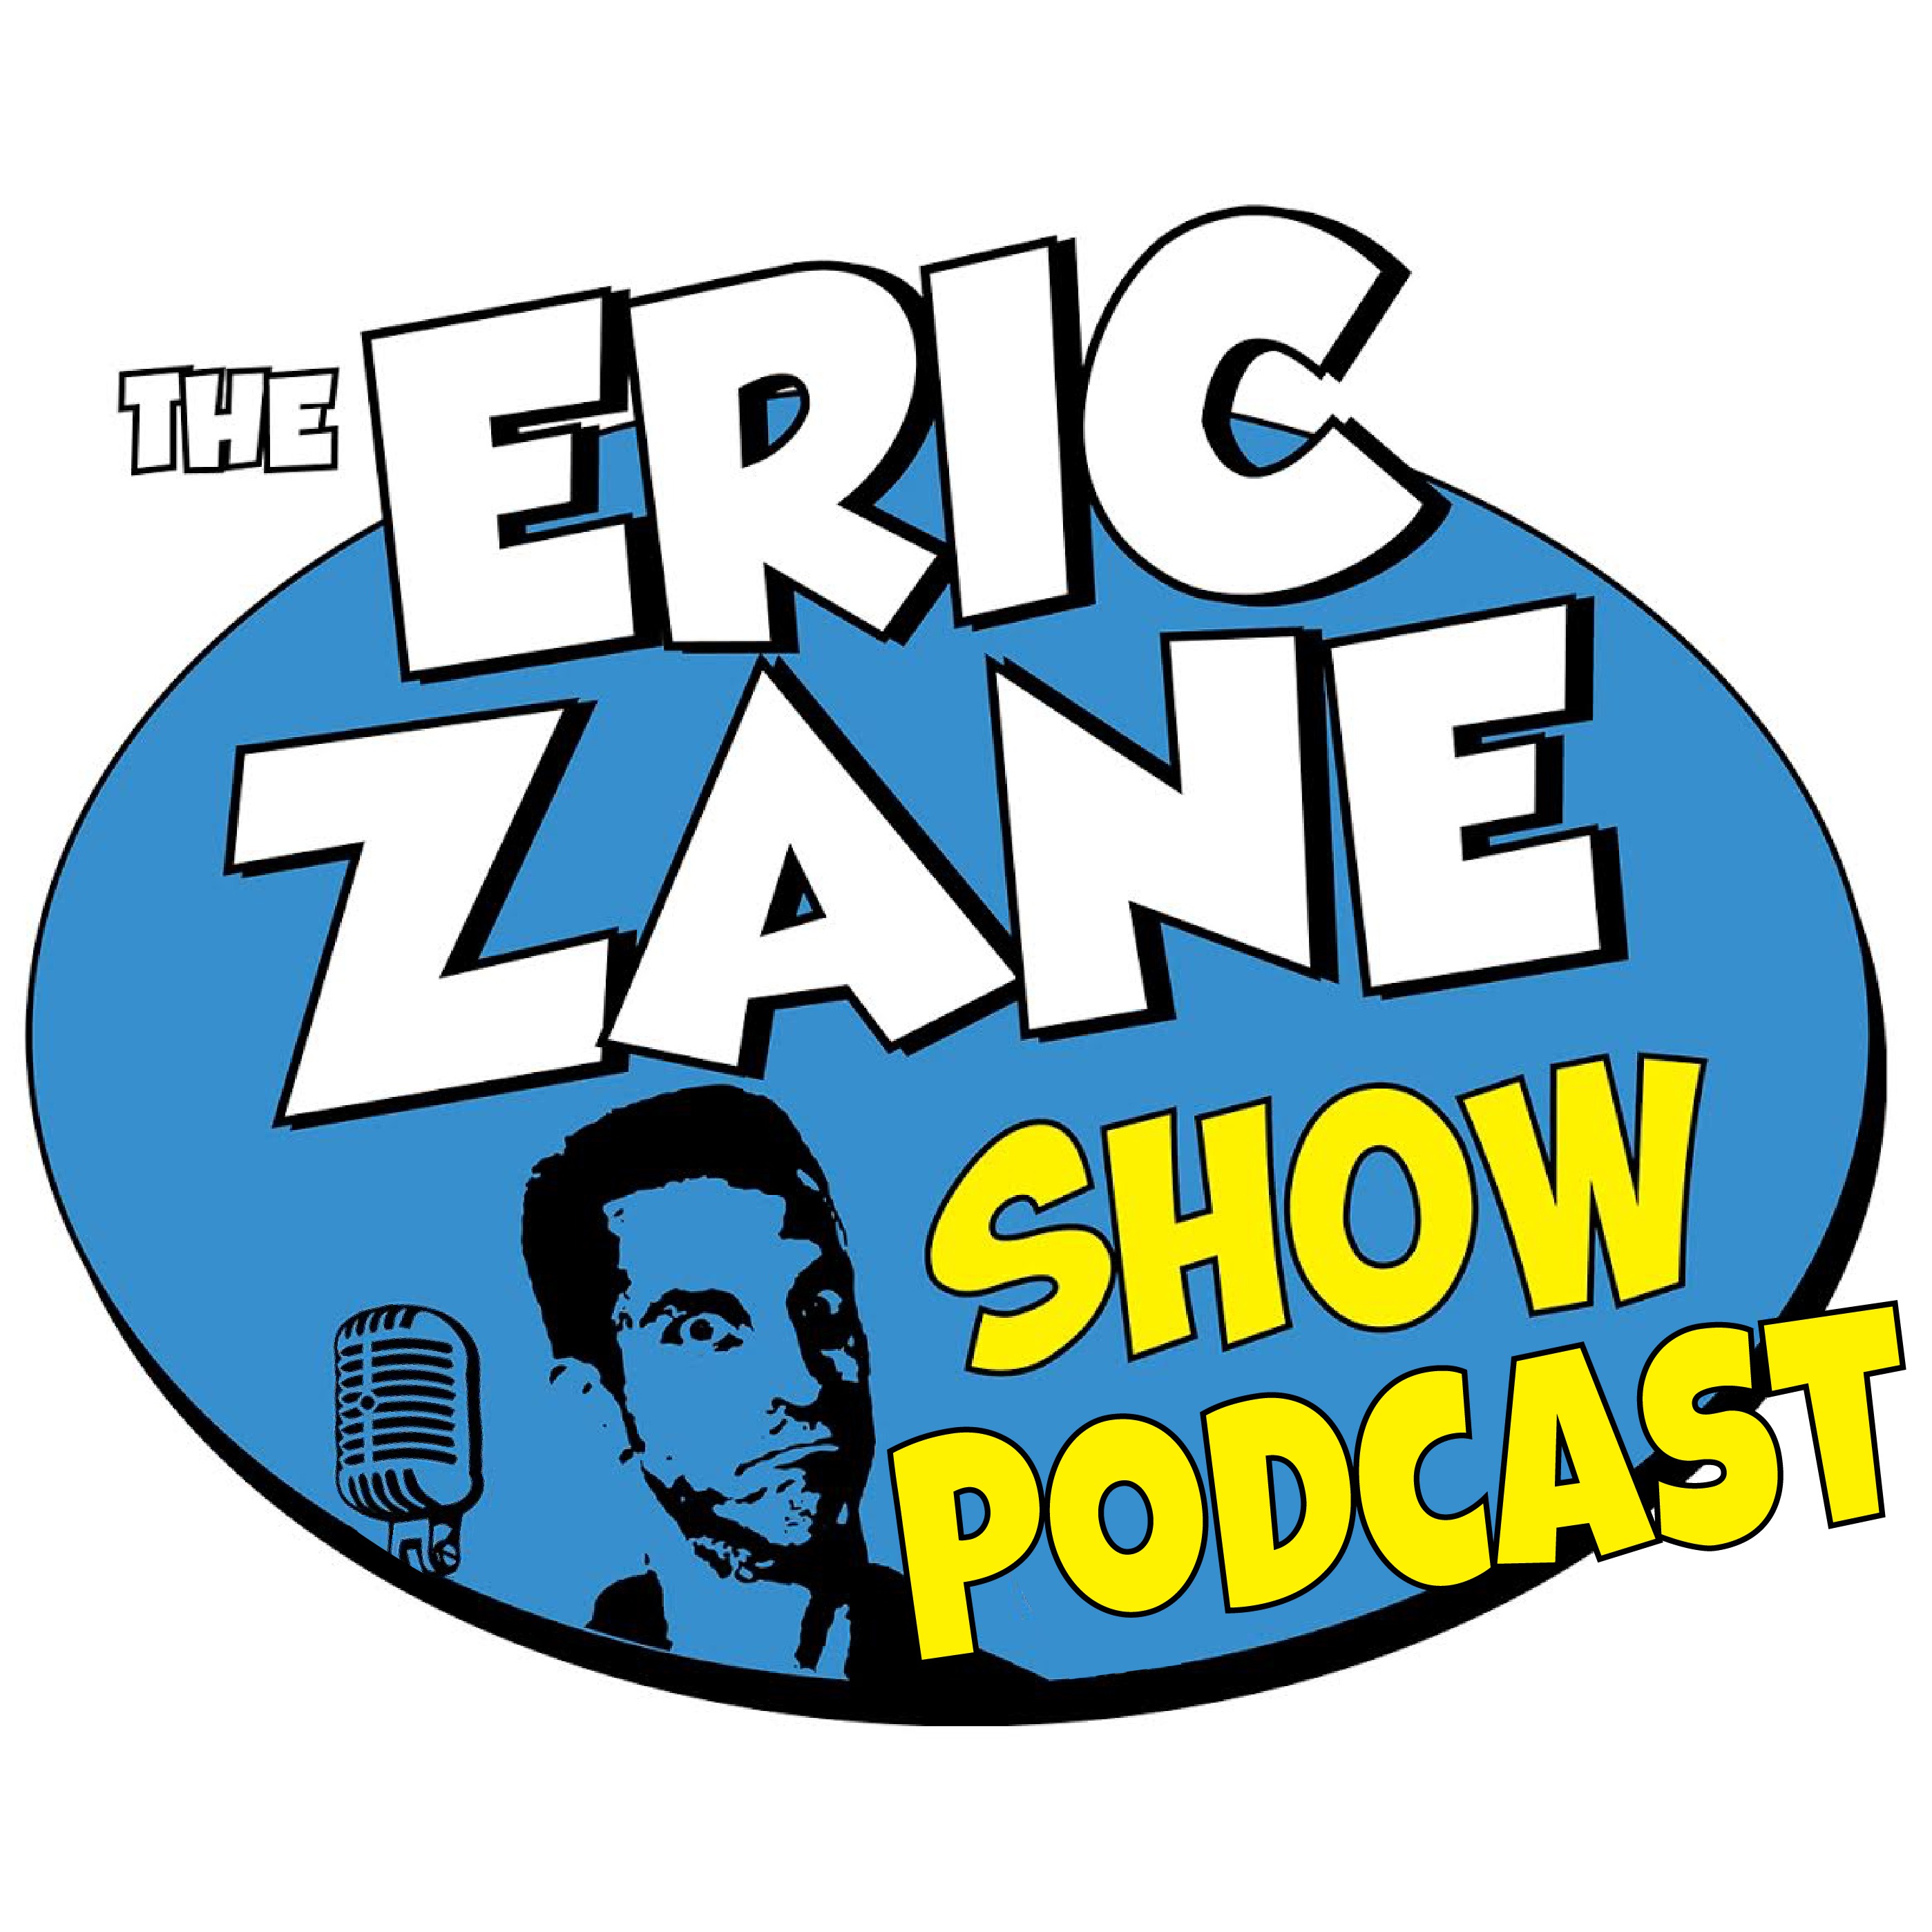 Eric Zane Show Podcast 873 Passing out hun-doughs like candy.